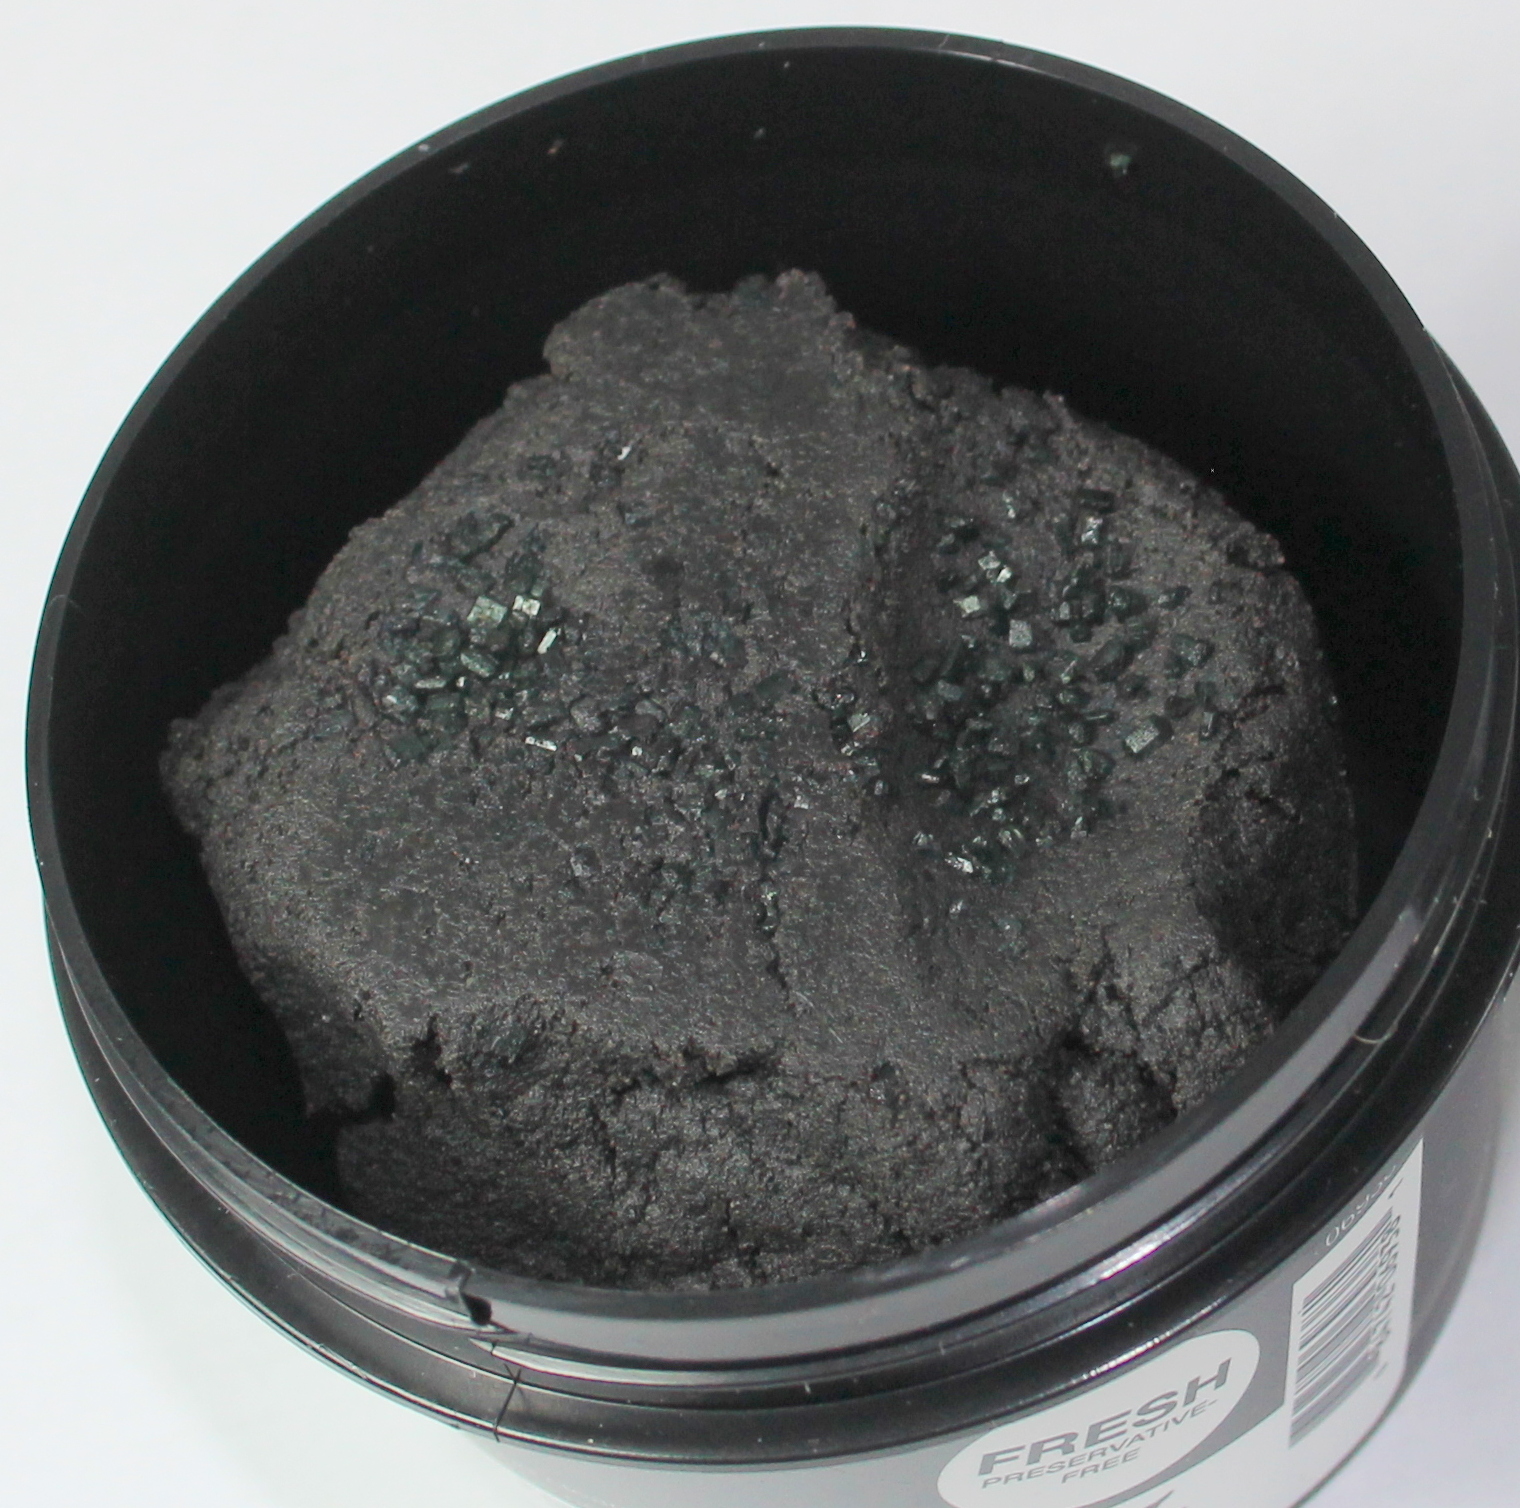 Lush Dark Angels Charcoal Cleanser Review